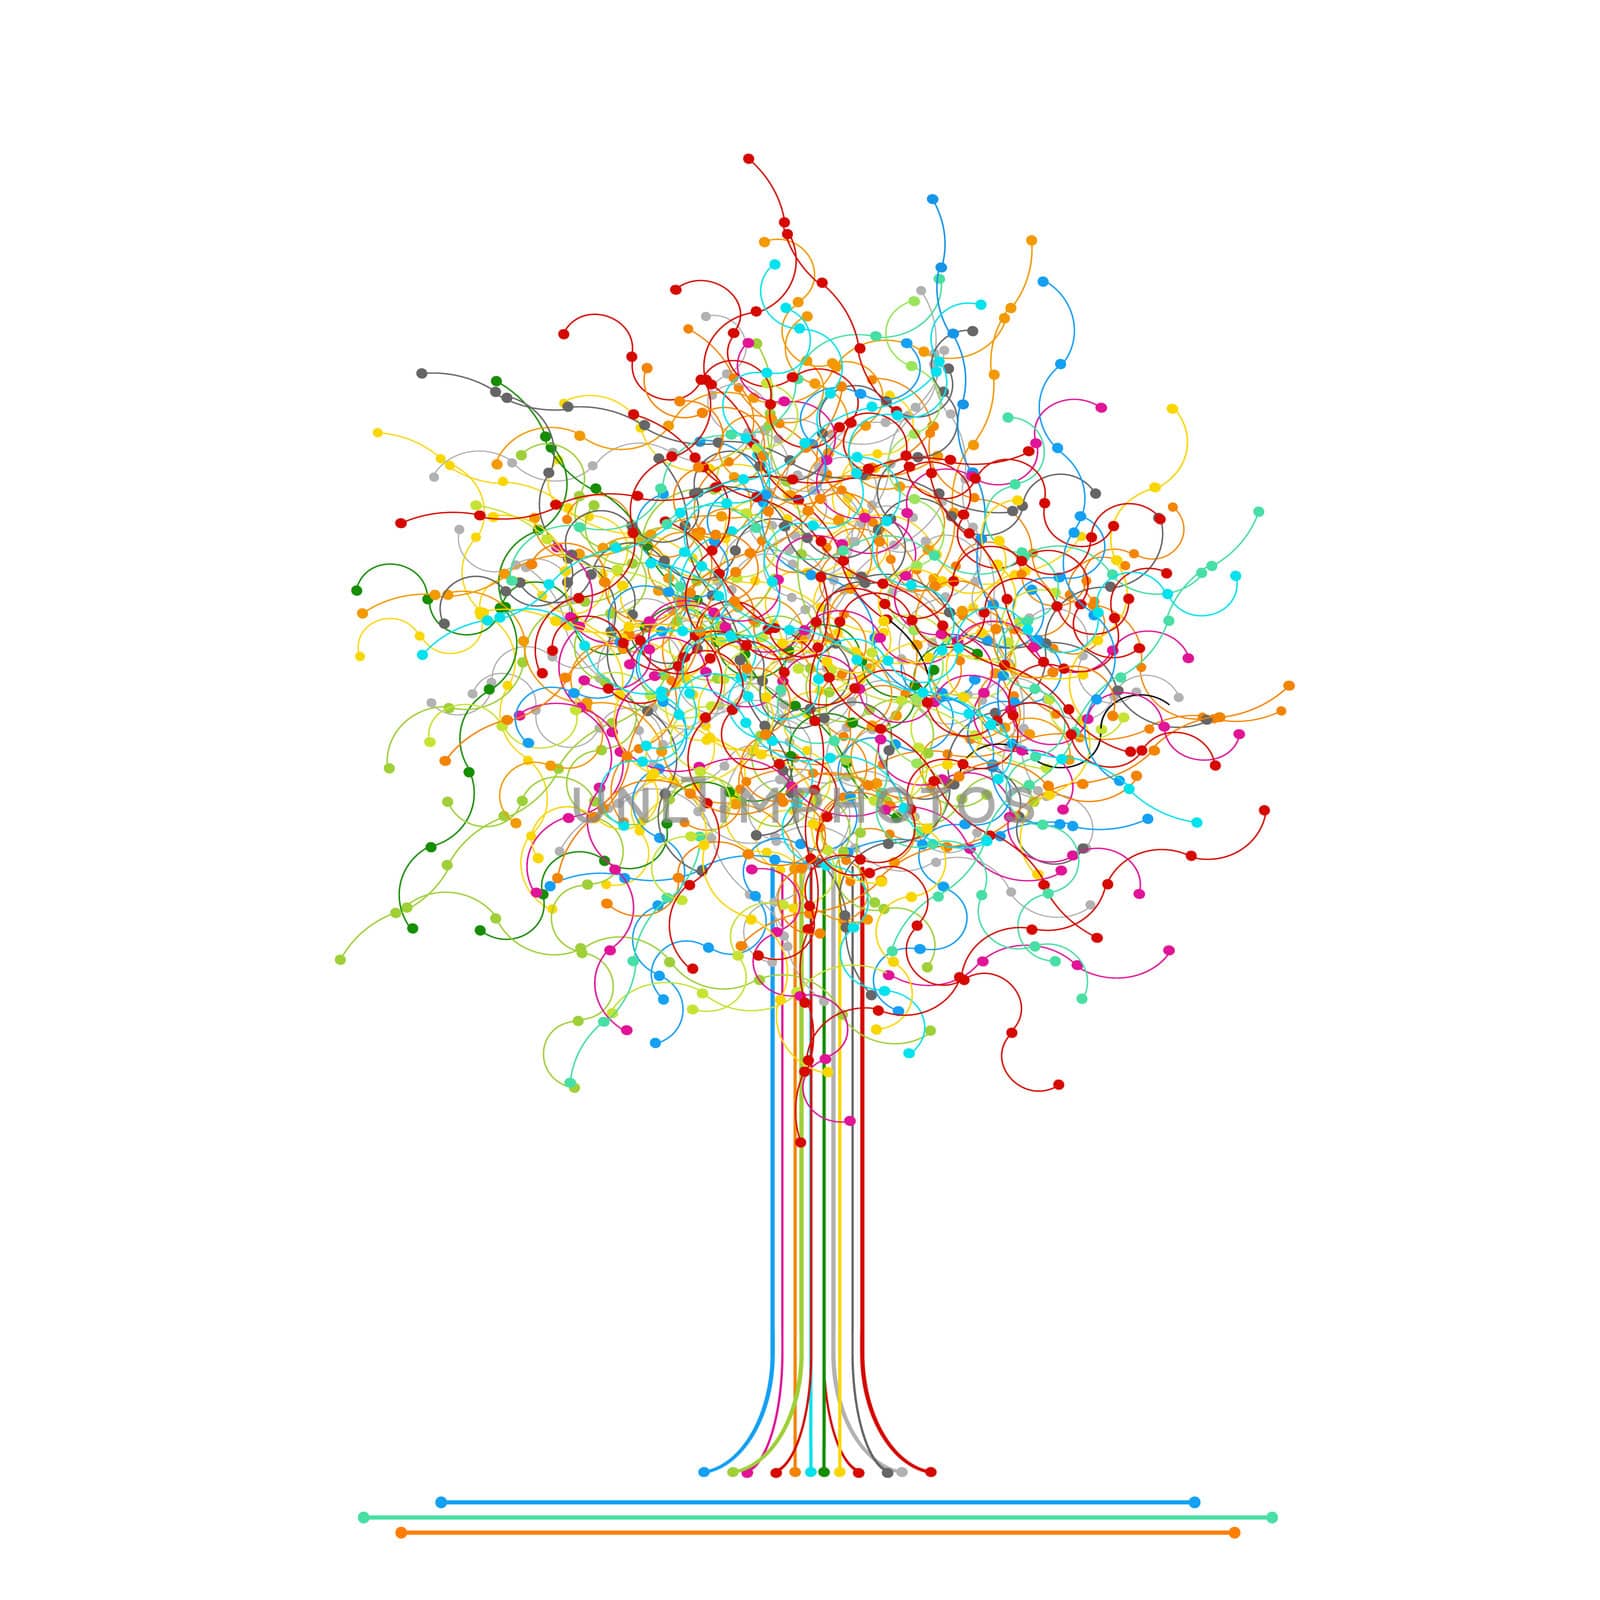 Tree made of colored abstract network by hibrida13